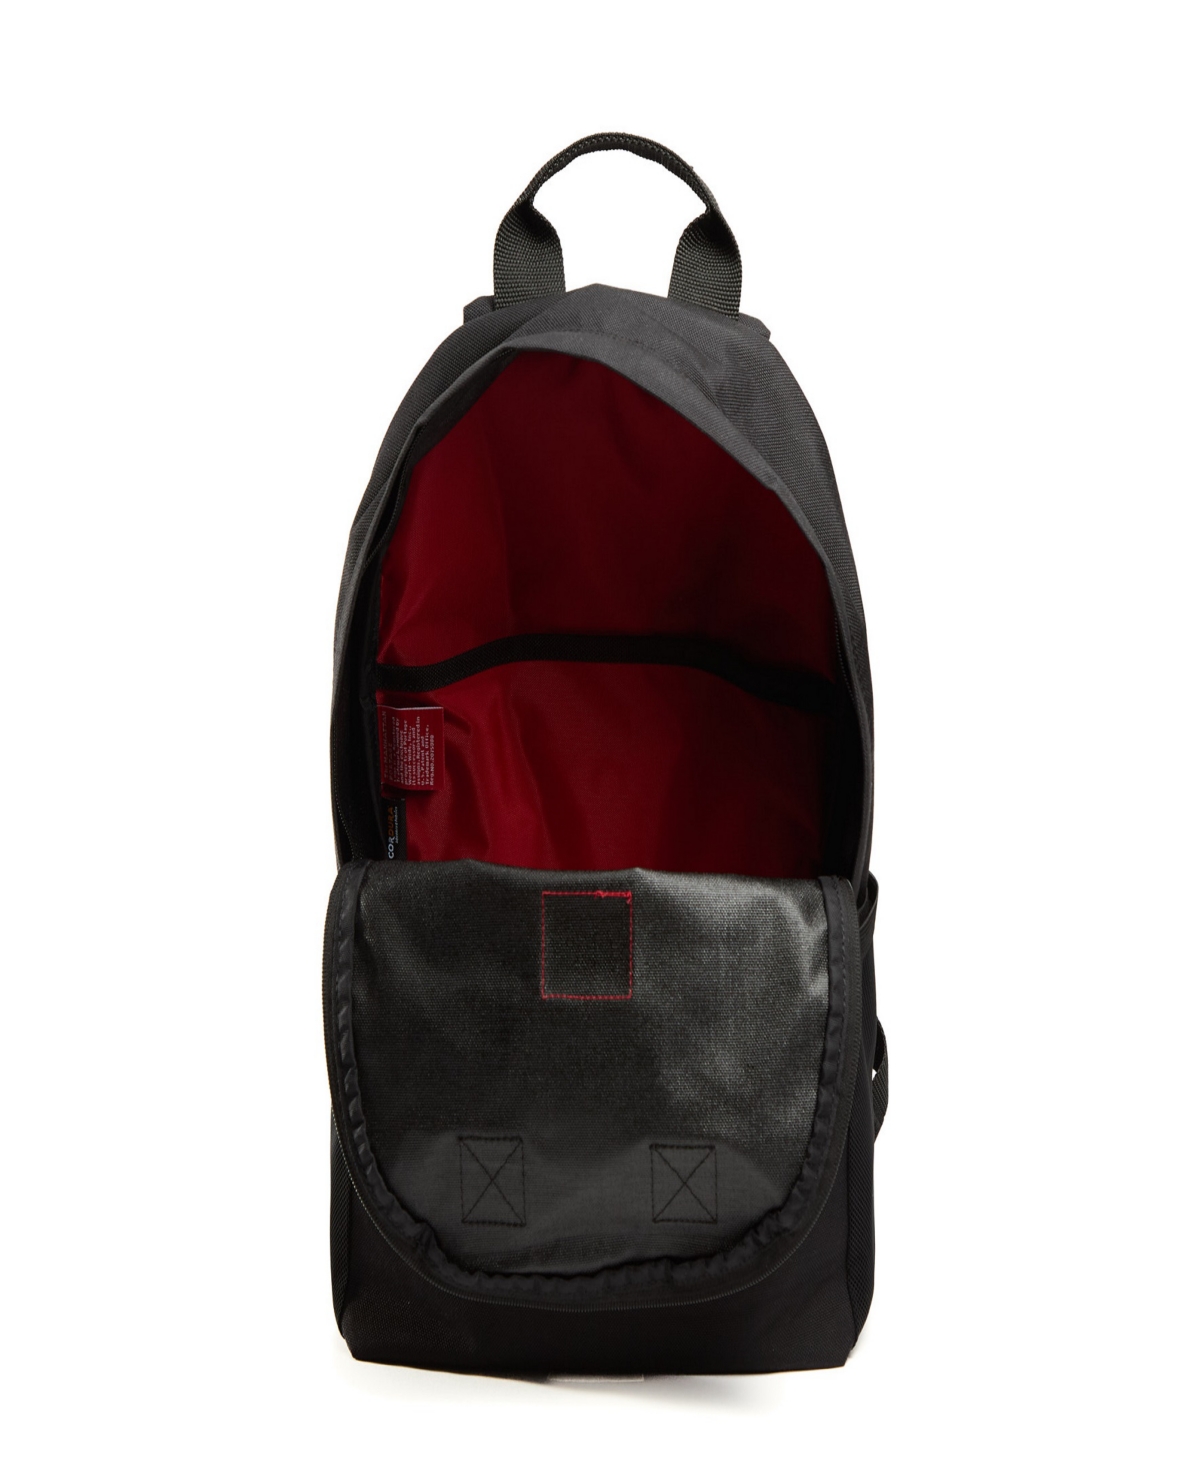 Shop Manhattan Portage Fabric Governors Backpack In Black